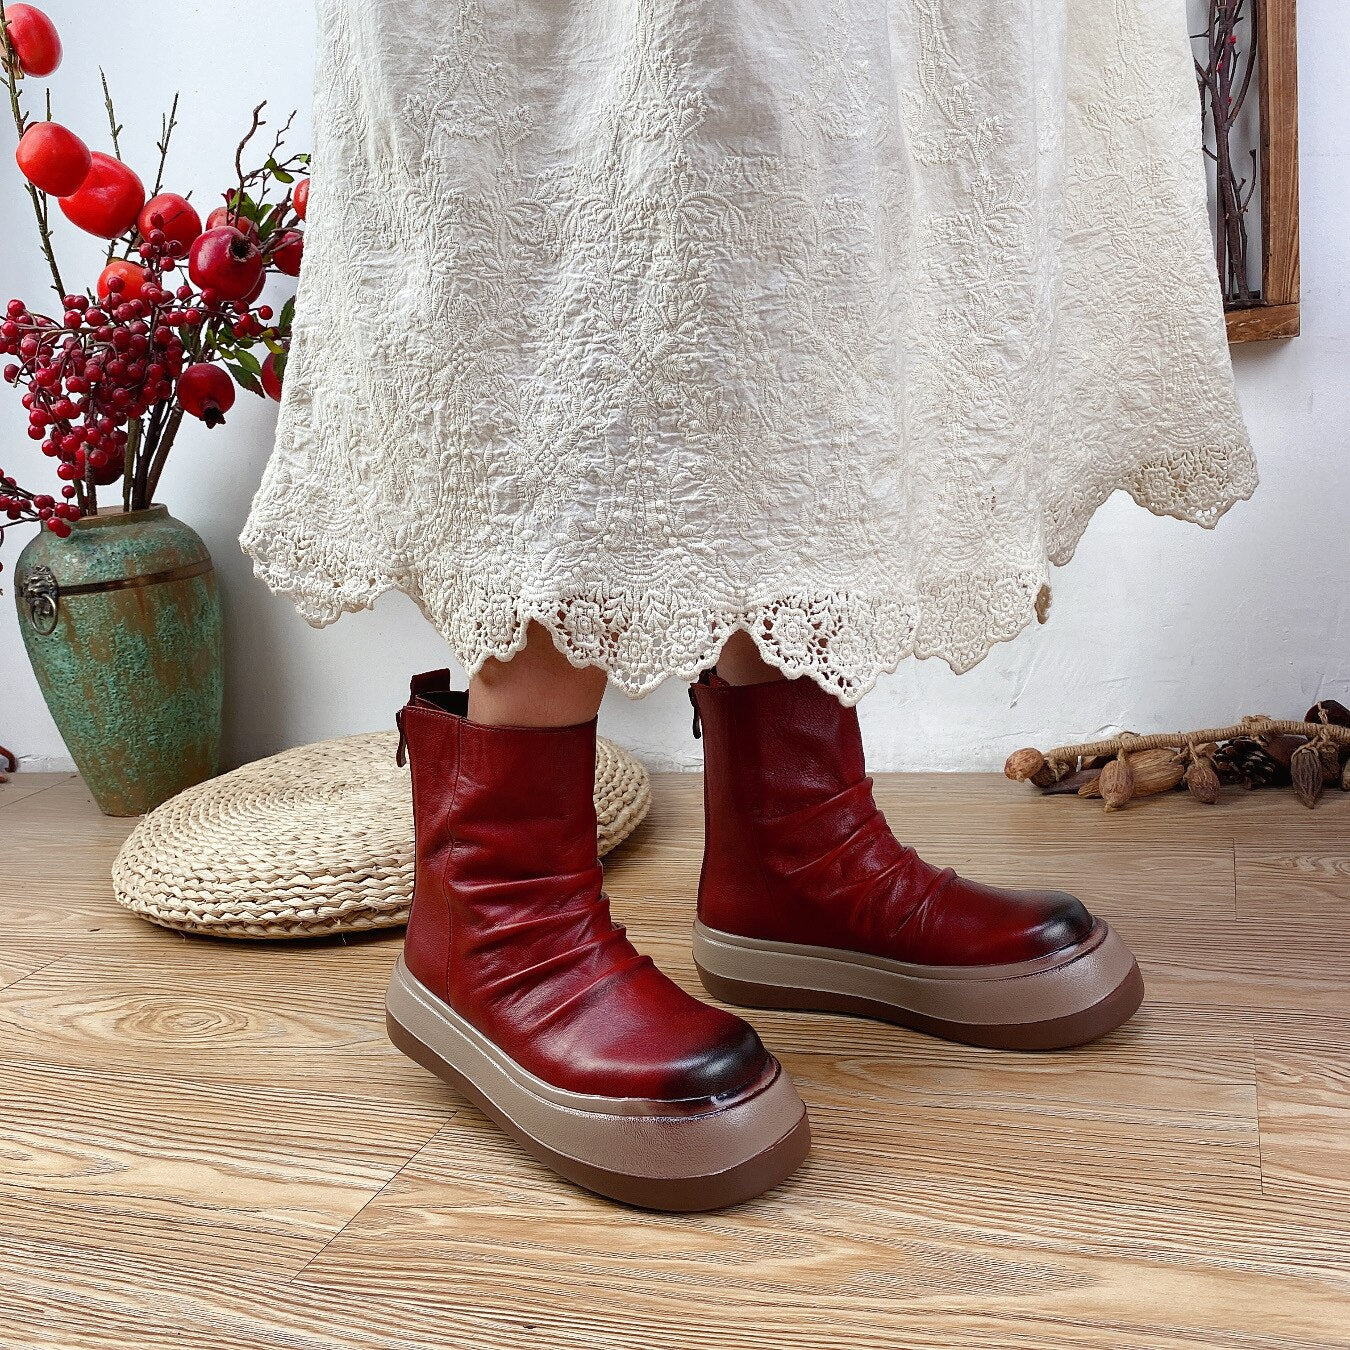 Concise Handmade Leisure Ankle Boots